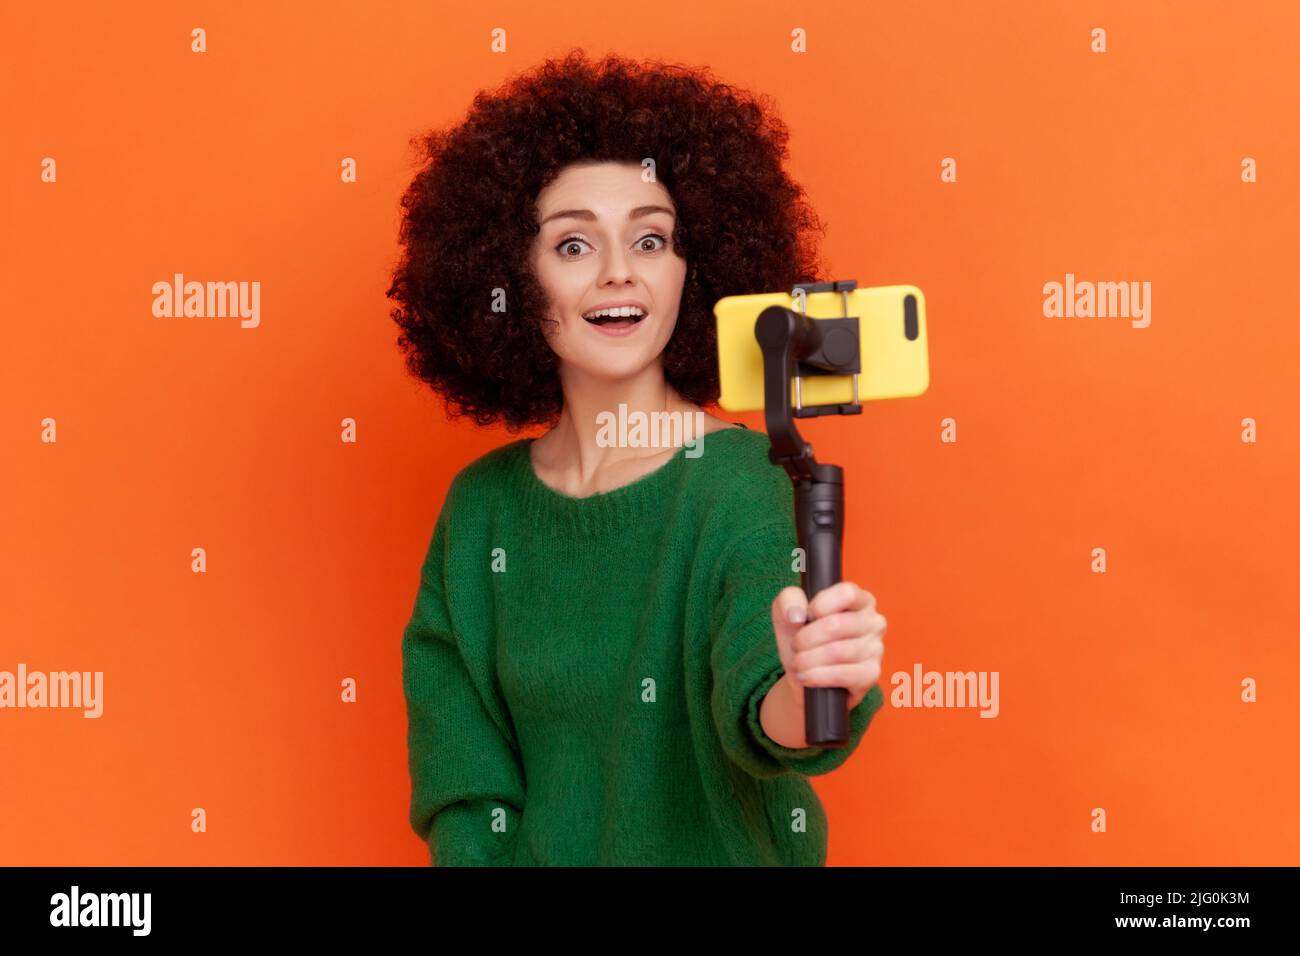 Portrait of woman blogger with Afro hairstyle wearing green casual style sweater using phone and steadicam, broadcasting livestream. Indoor studio shot isolated on orange background. Stock Photo